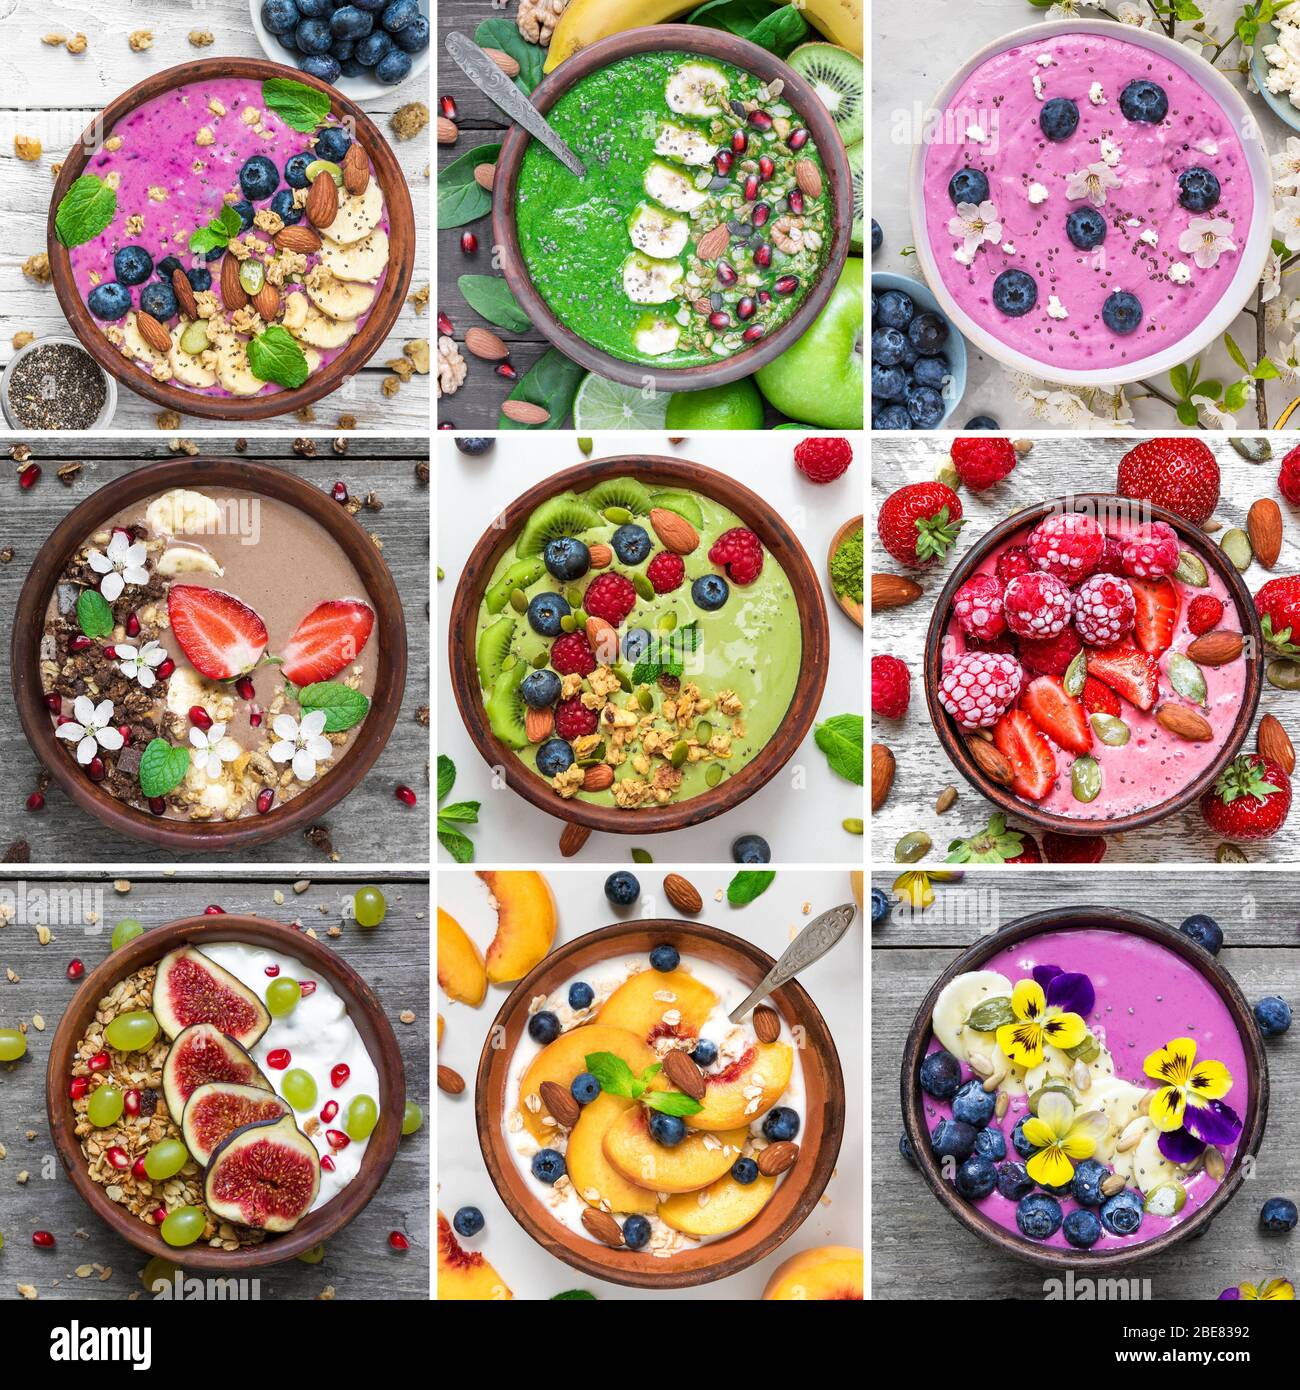 Collage of different breakfast food. Bowls with smoothie, yogurt, granola. Top view. Square picture. Healthy diet food Stock Photo